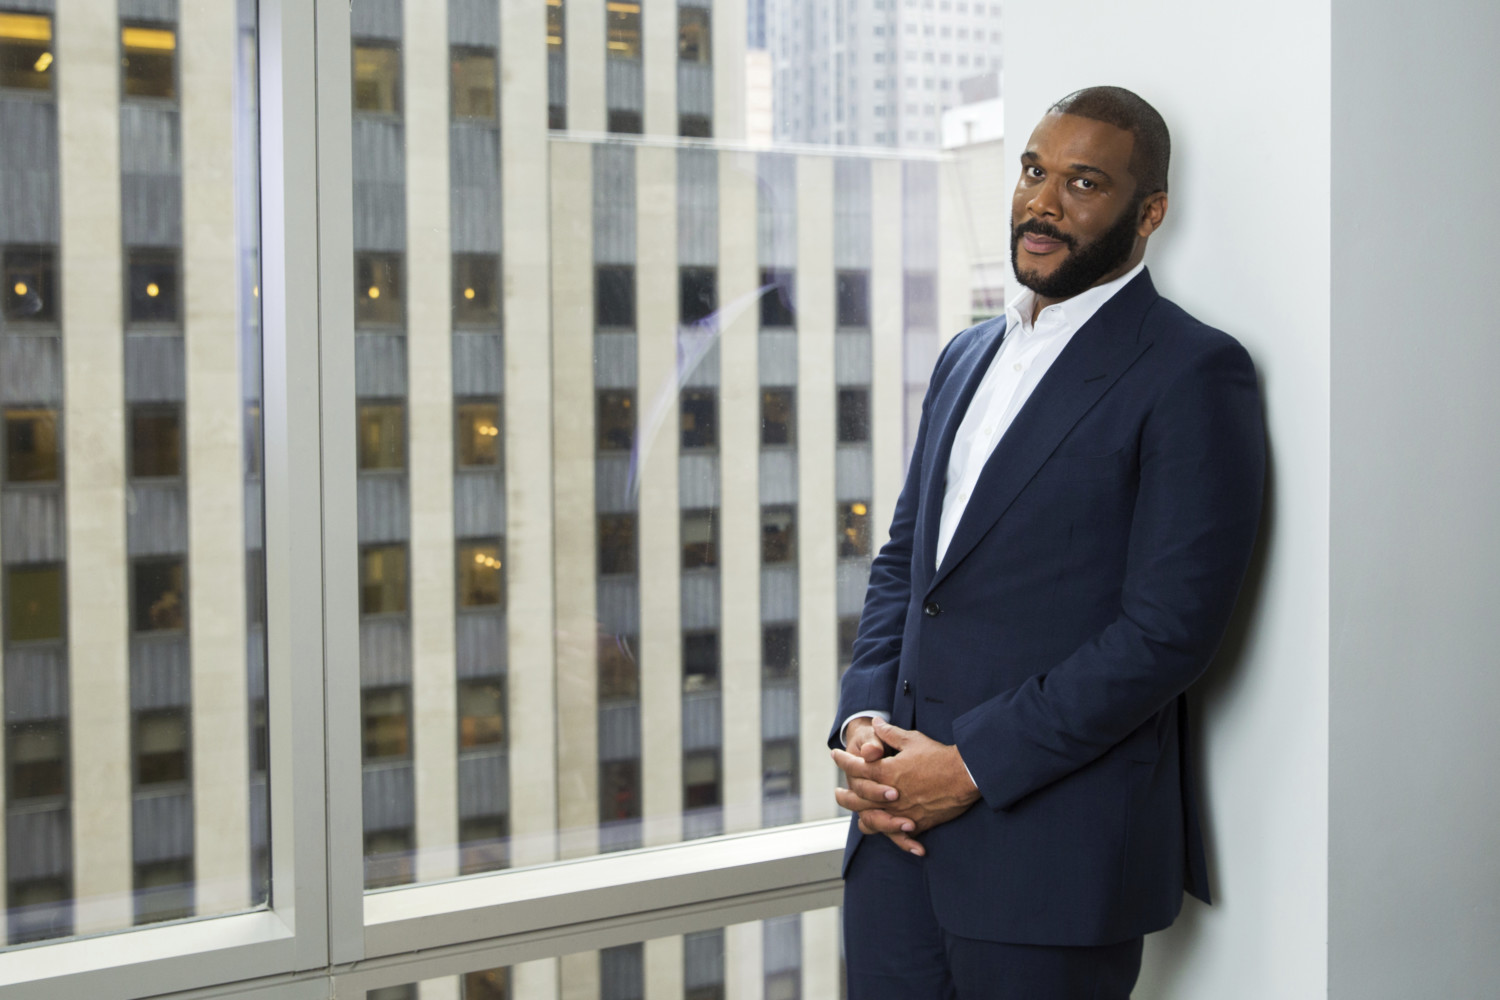 Tyler Perry stands in front of a window